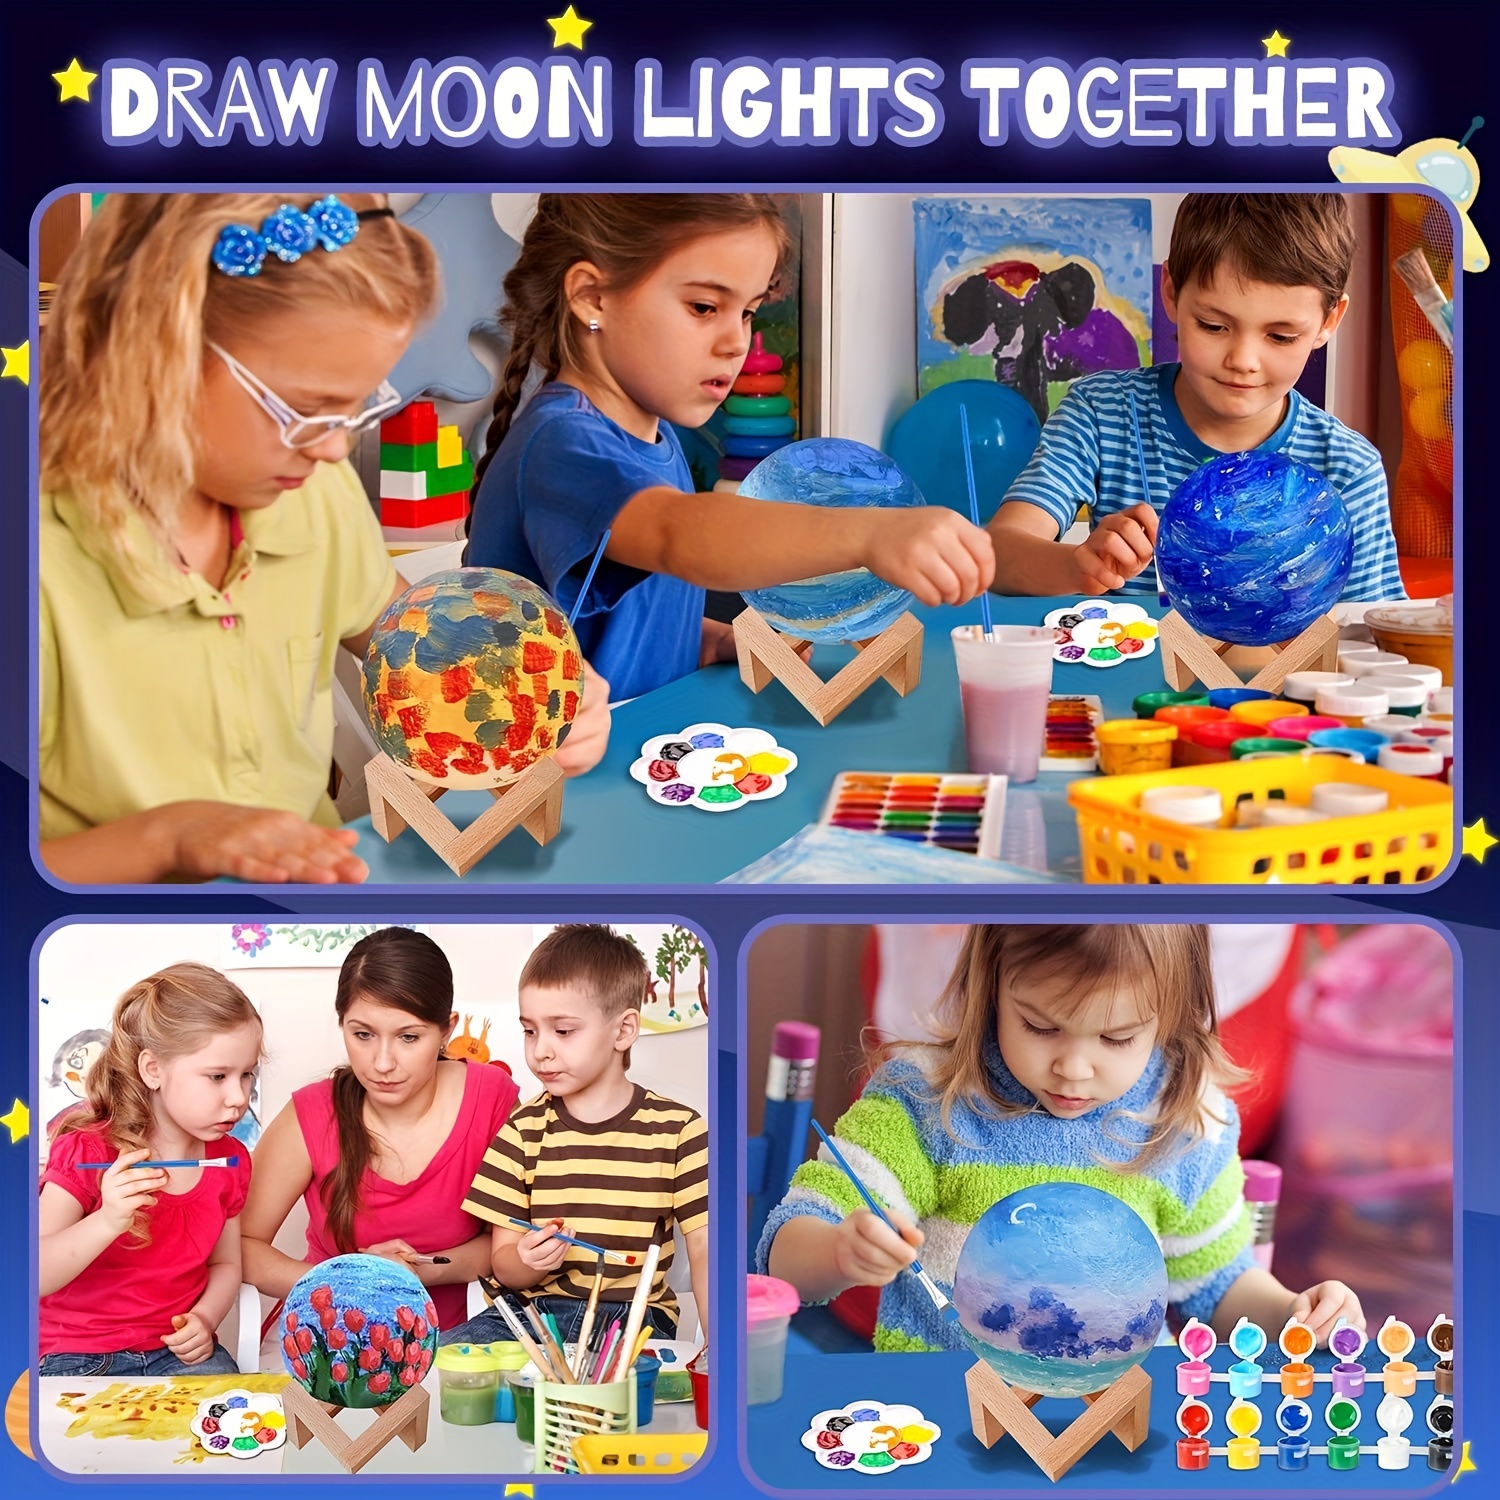 weceit Paint Your Own Moon Lamp Kit, christmas gifts, DIY 3D Moon